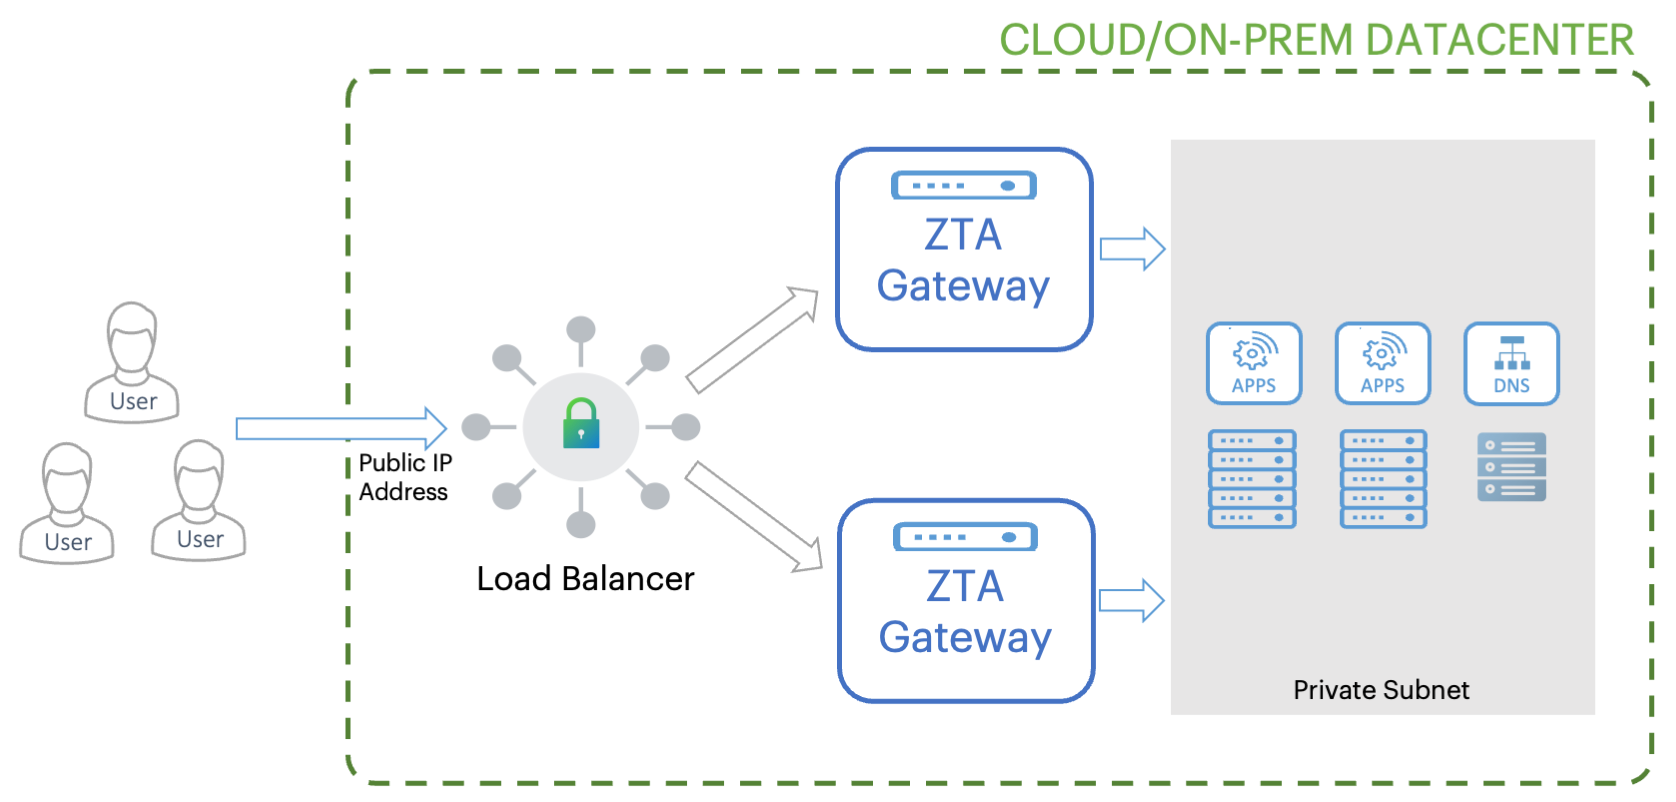 Deploying a pair of Gateways for high availability